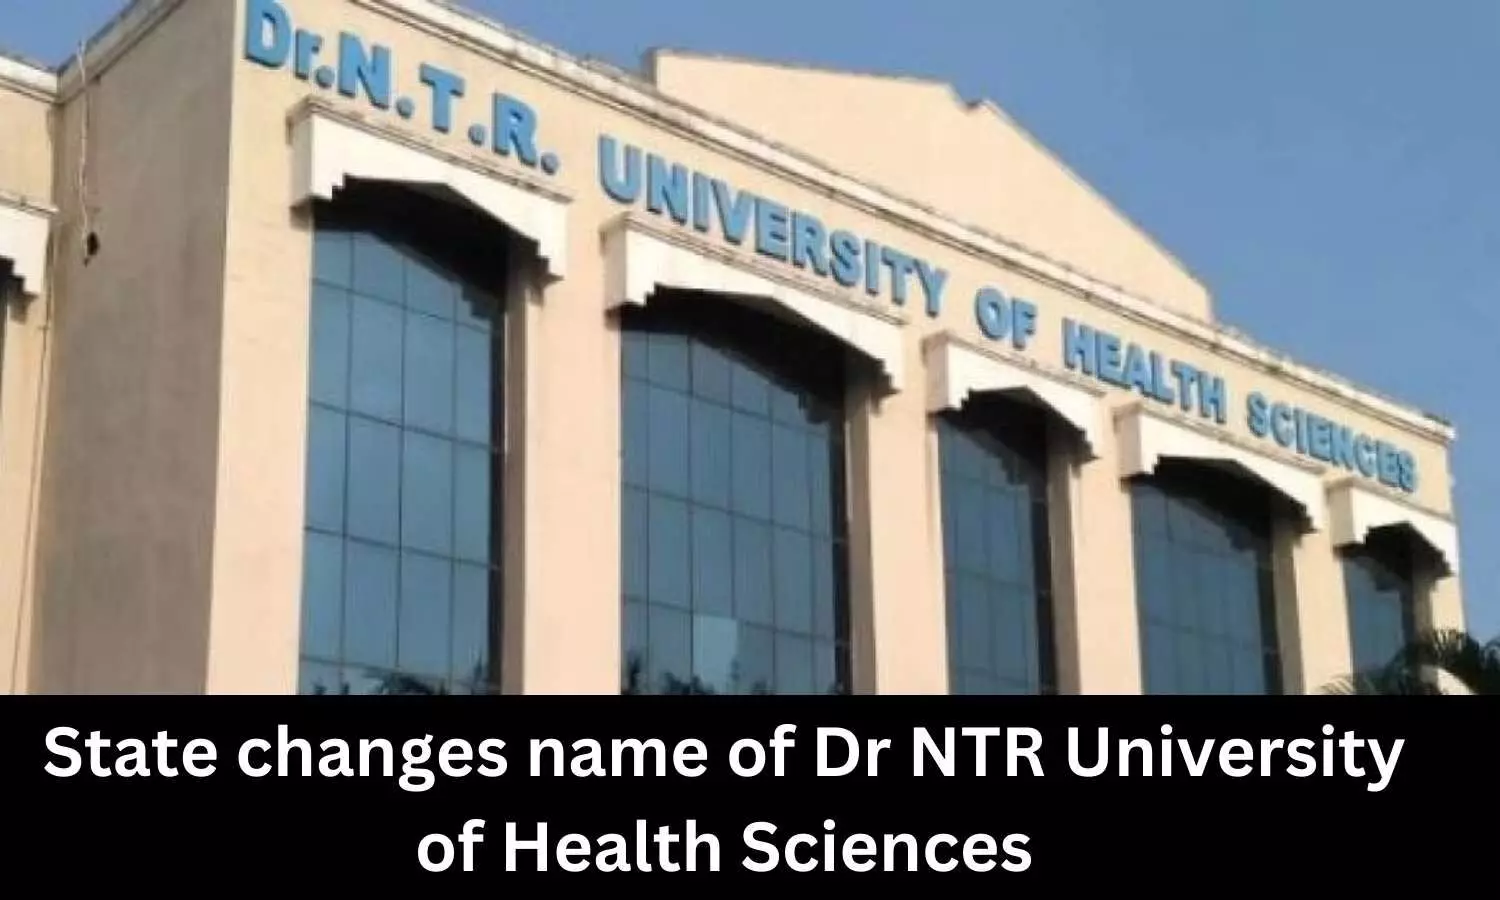 Dr NTR University of Health Sciences renamed, NMC intervention demanded for retaining previous name